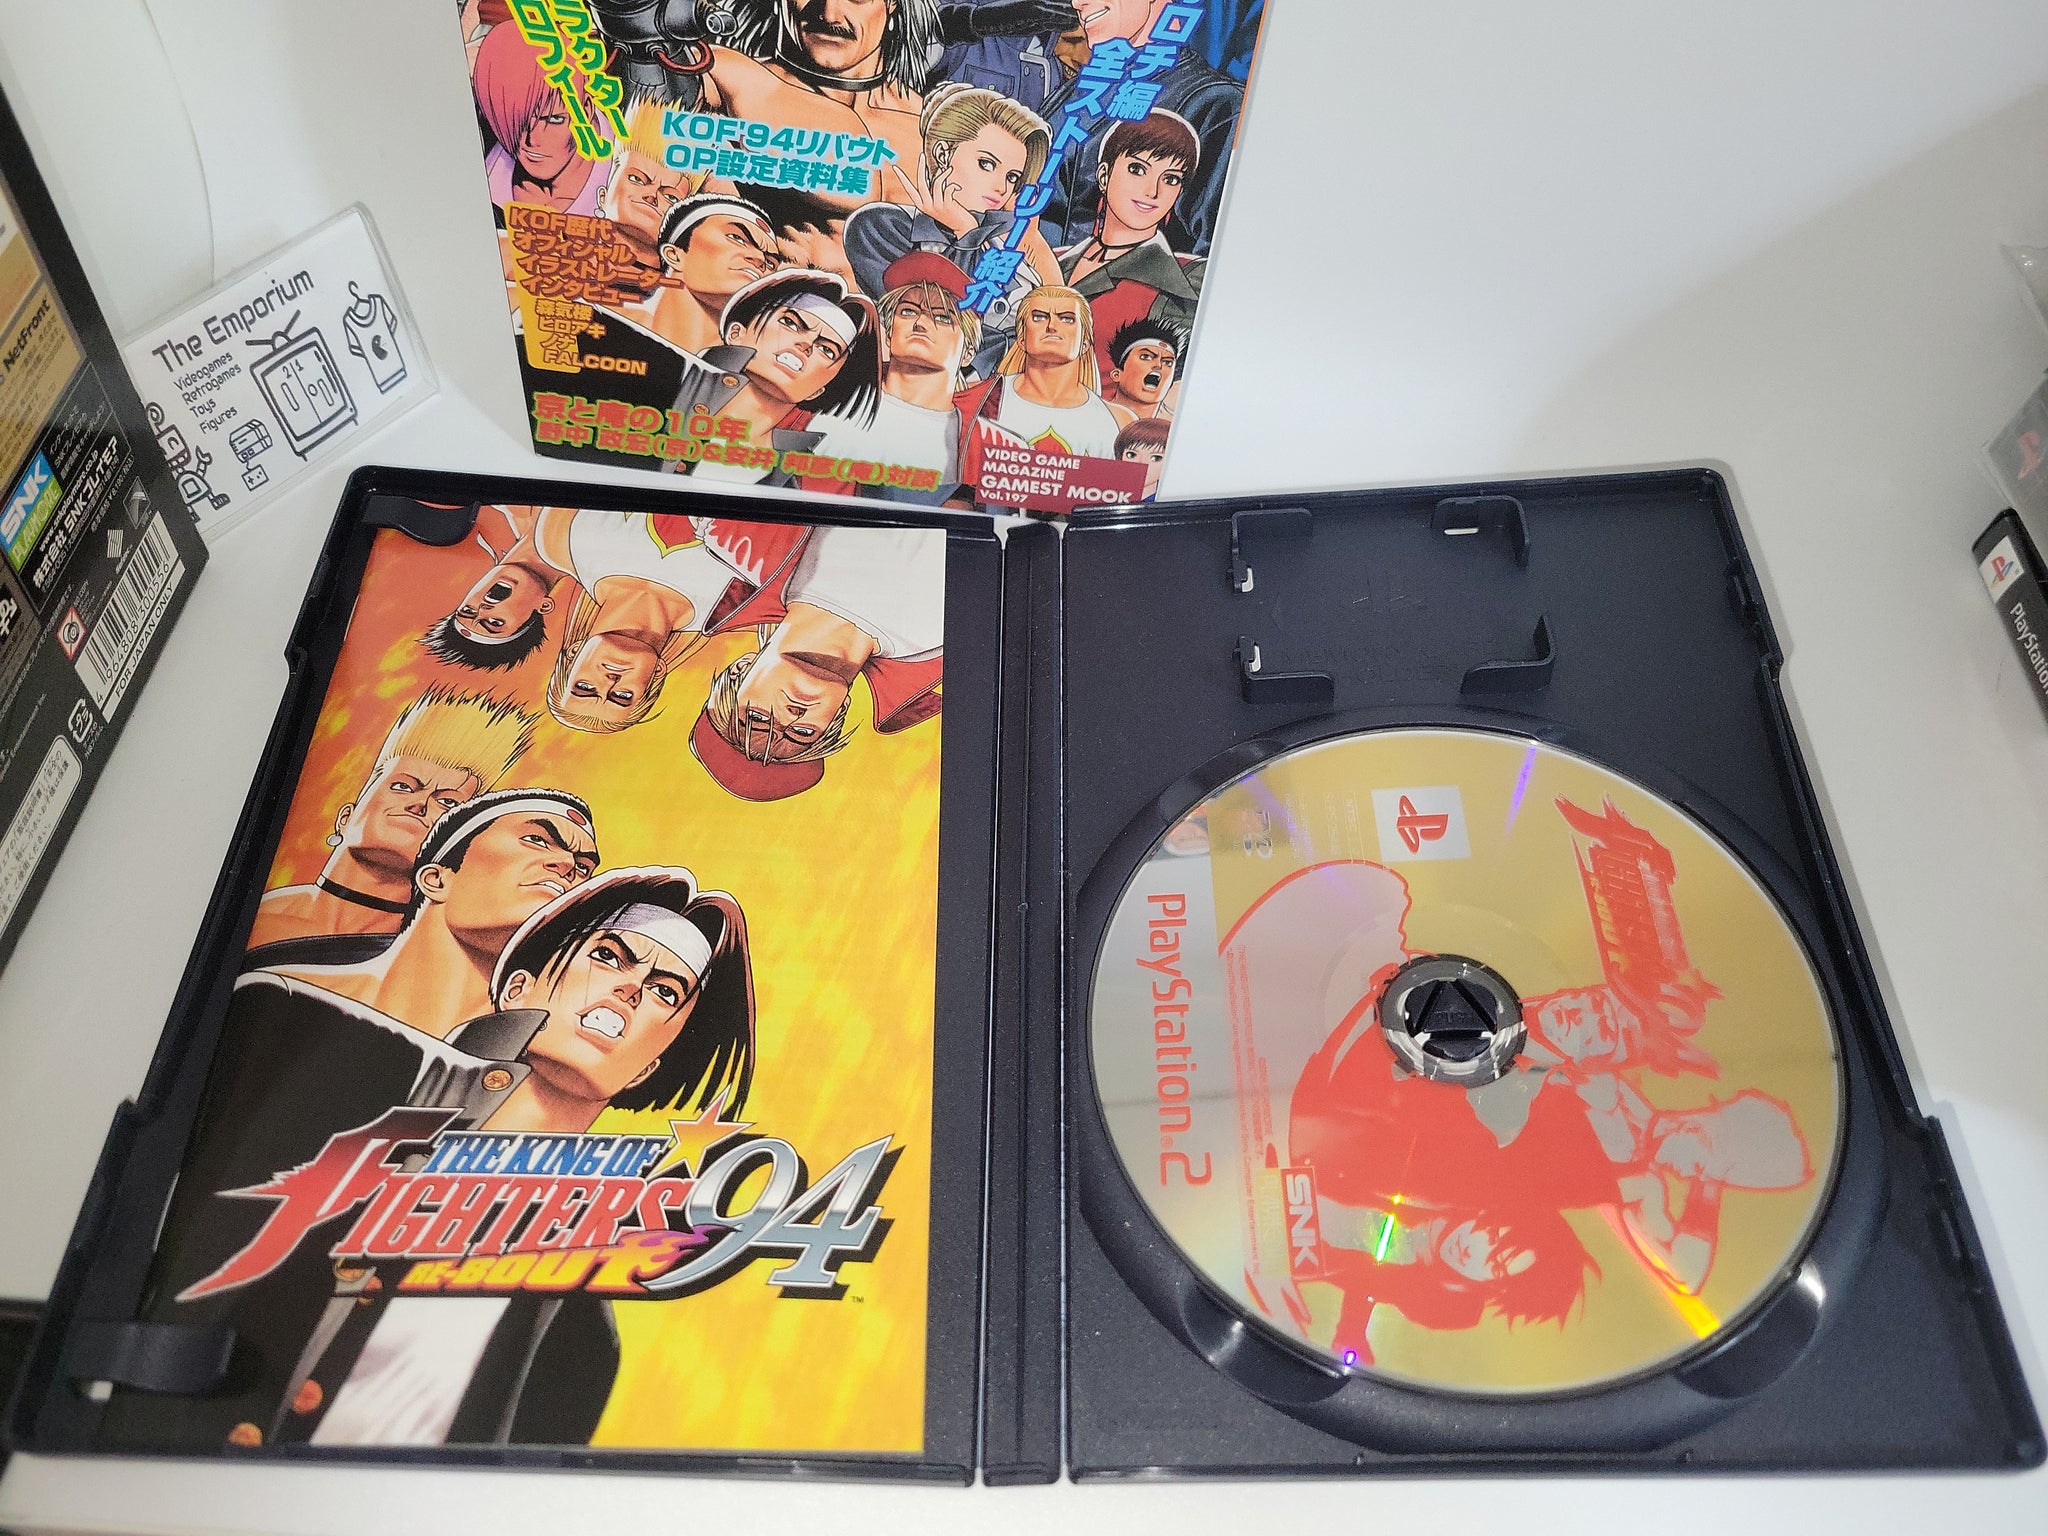 The King of Fighters '94 Re-Bout (Sony PlayStation 2, 2004) for